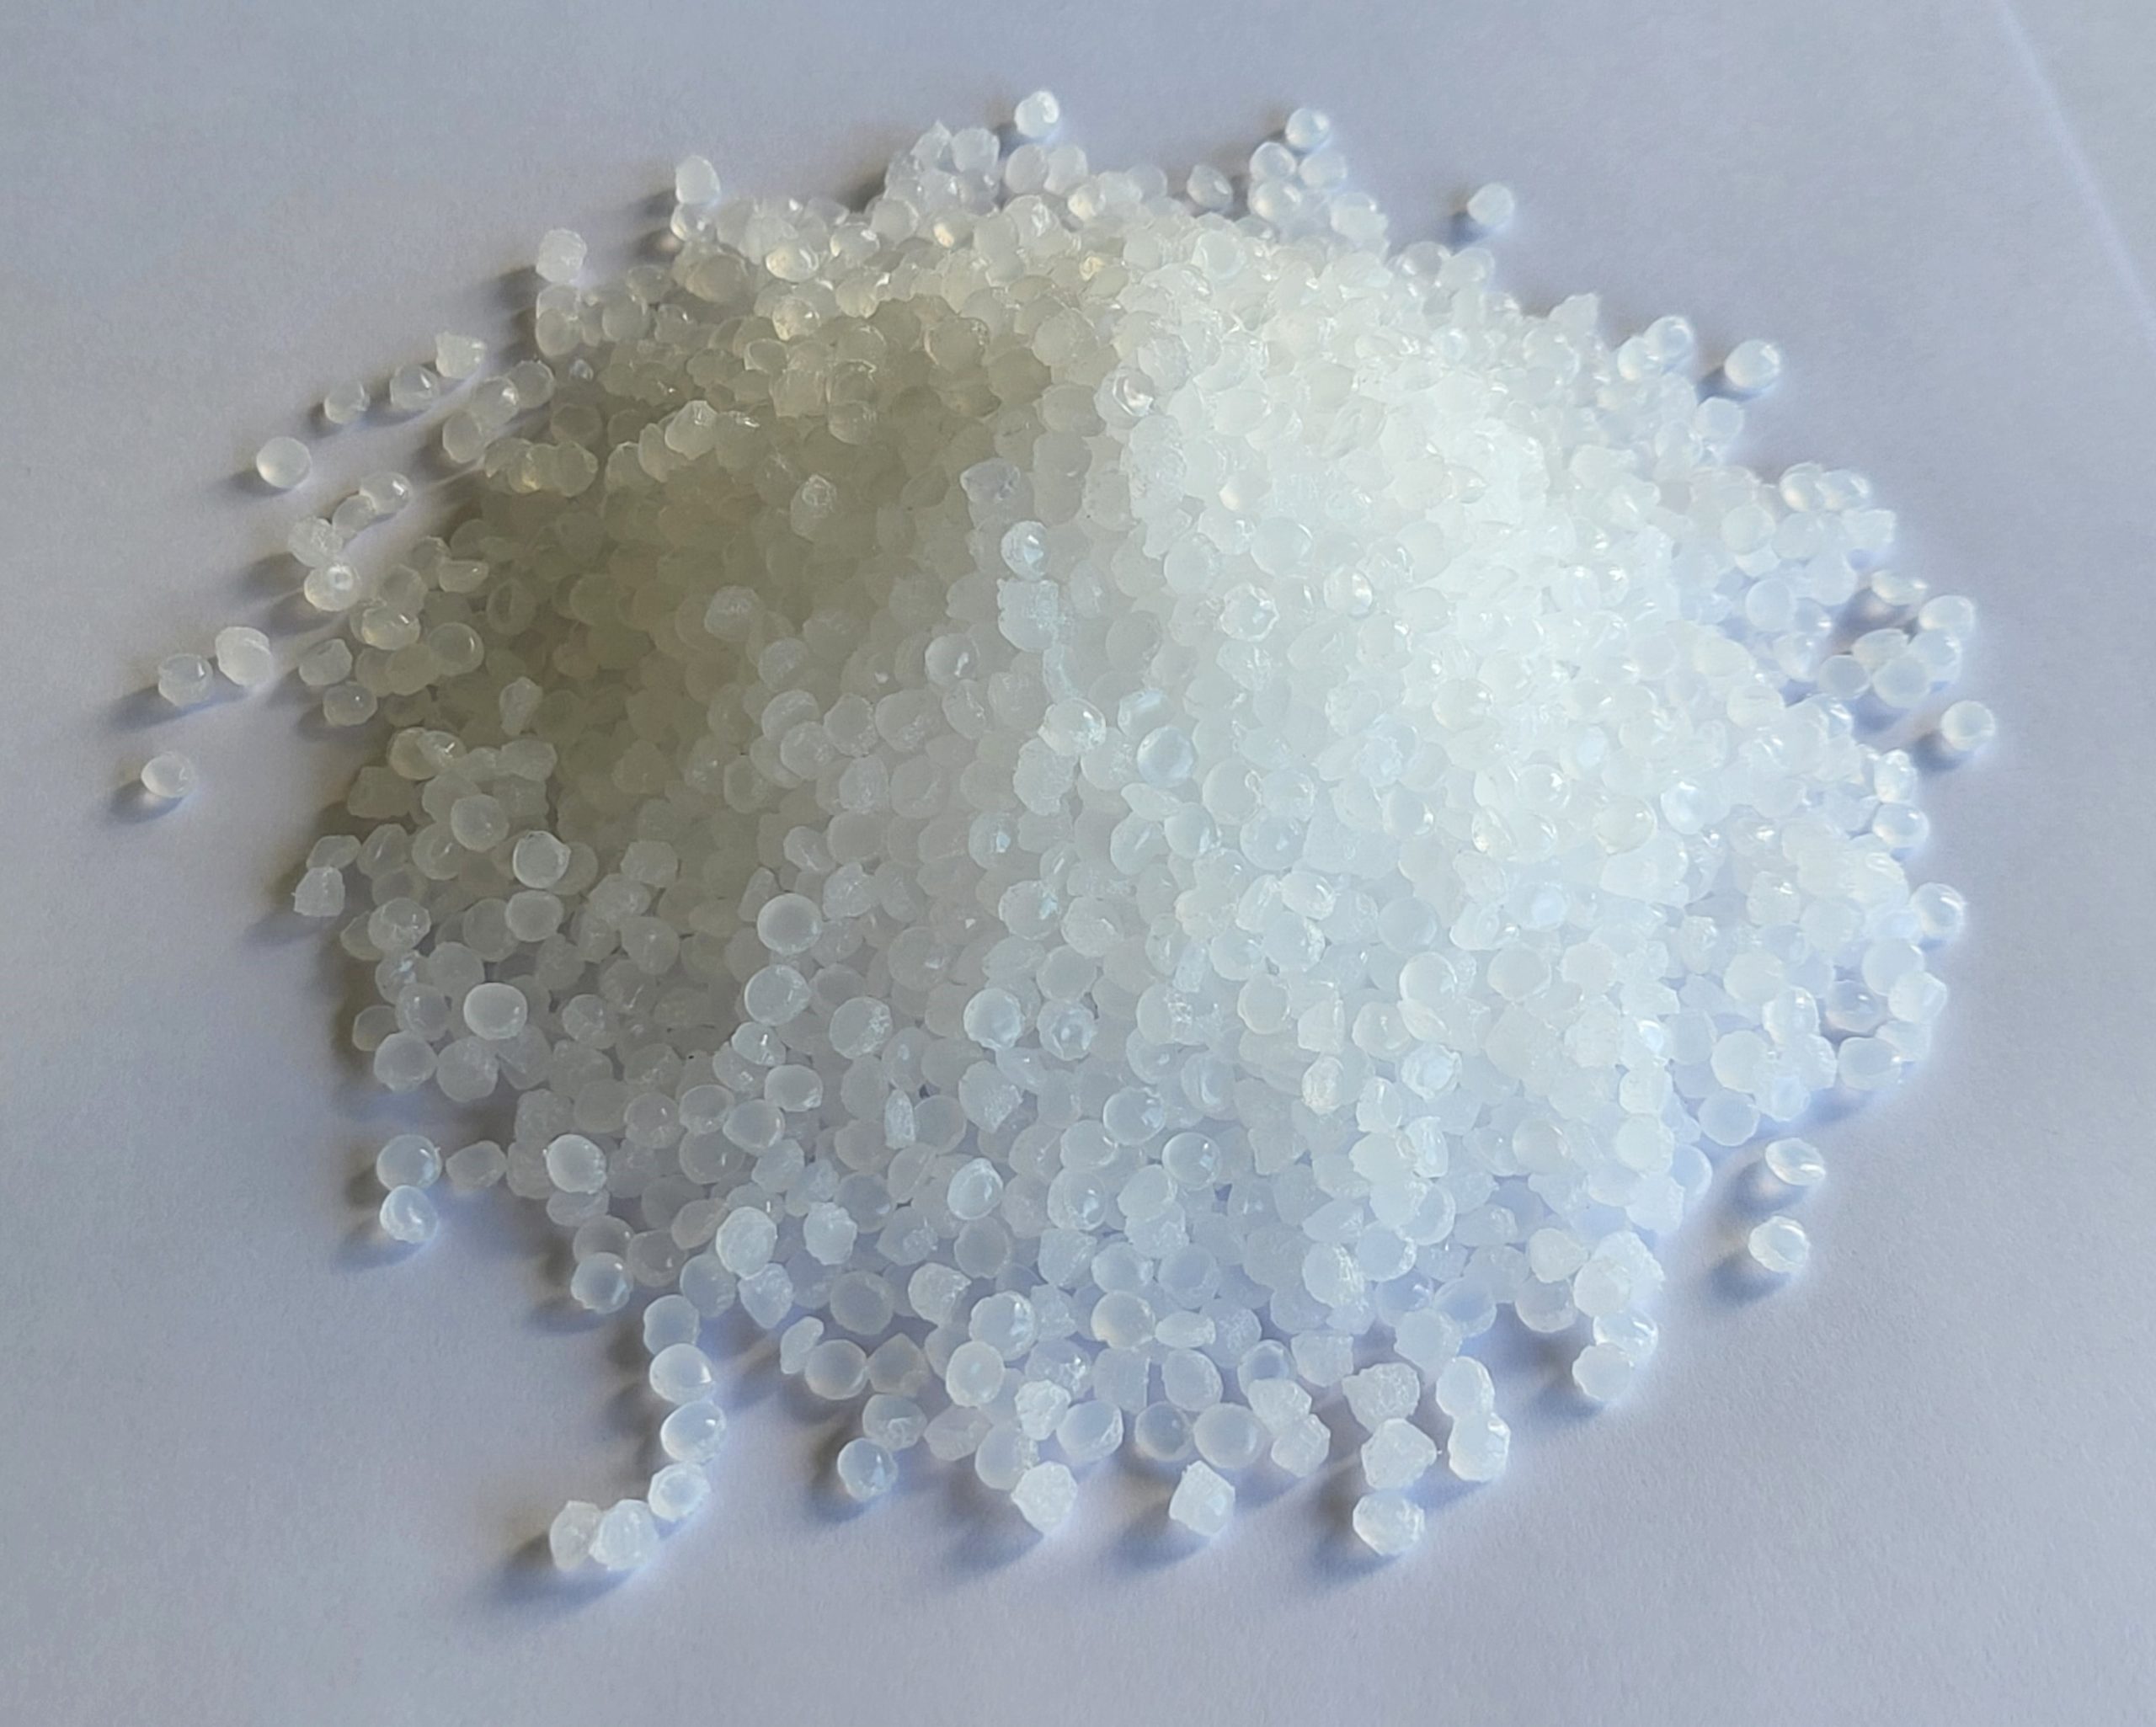 m-LLDPE (Exceed 1018)